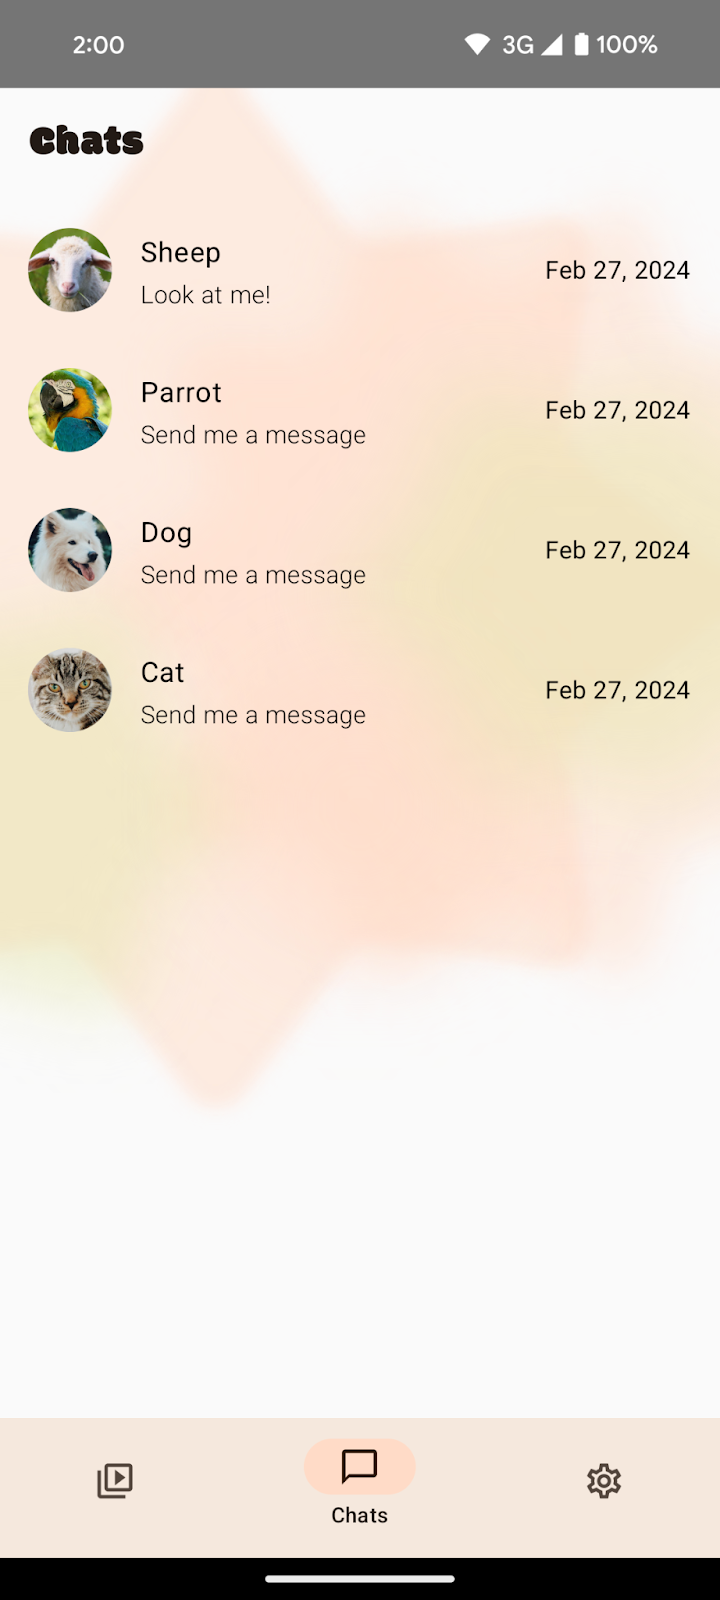 The Chats screen of the SocialLite app. 